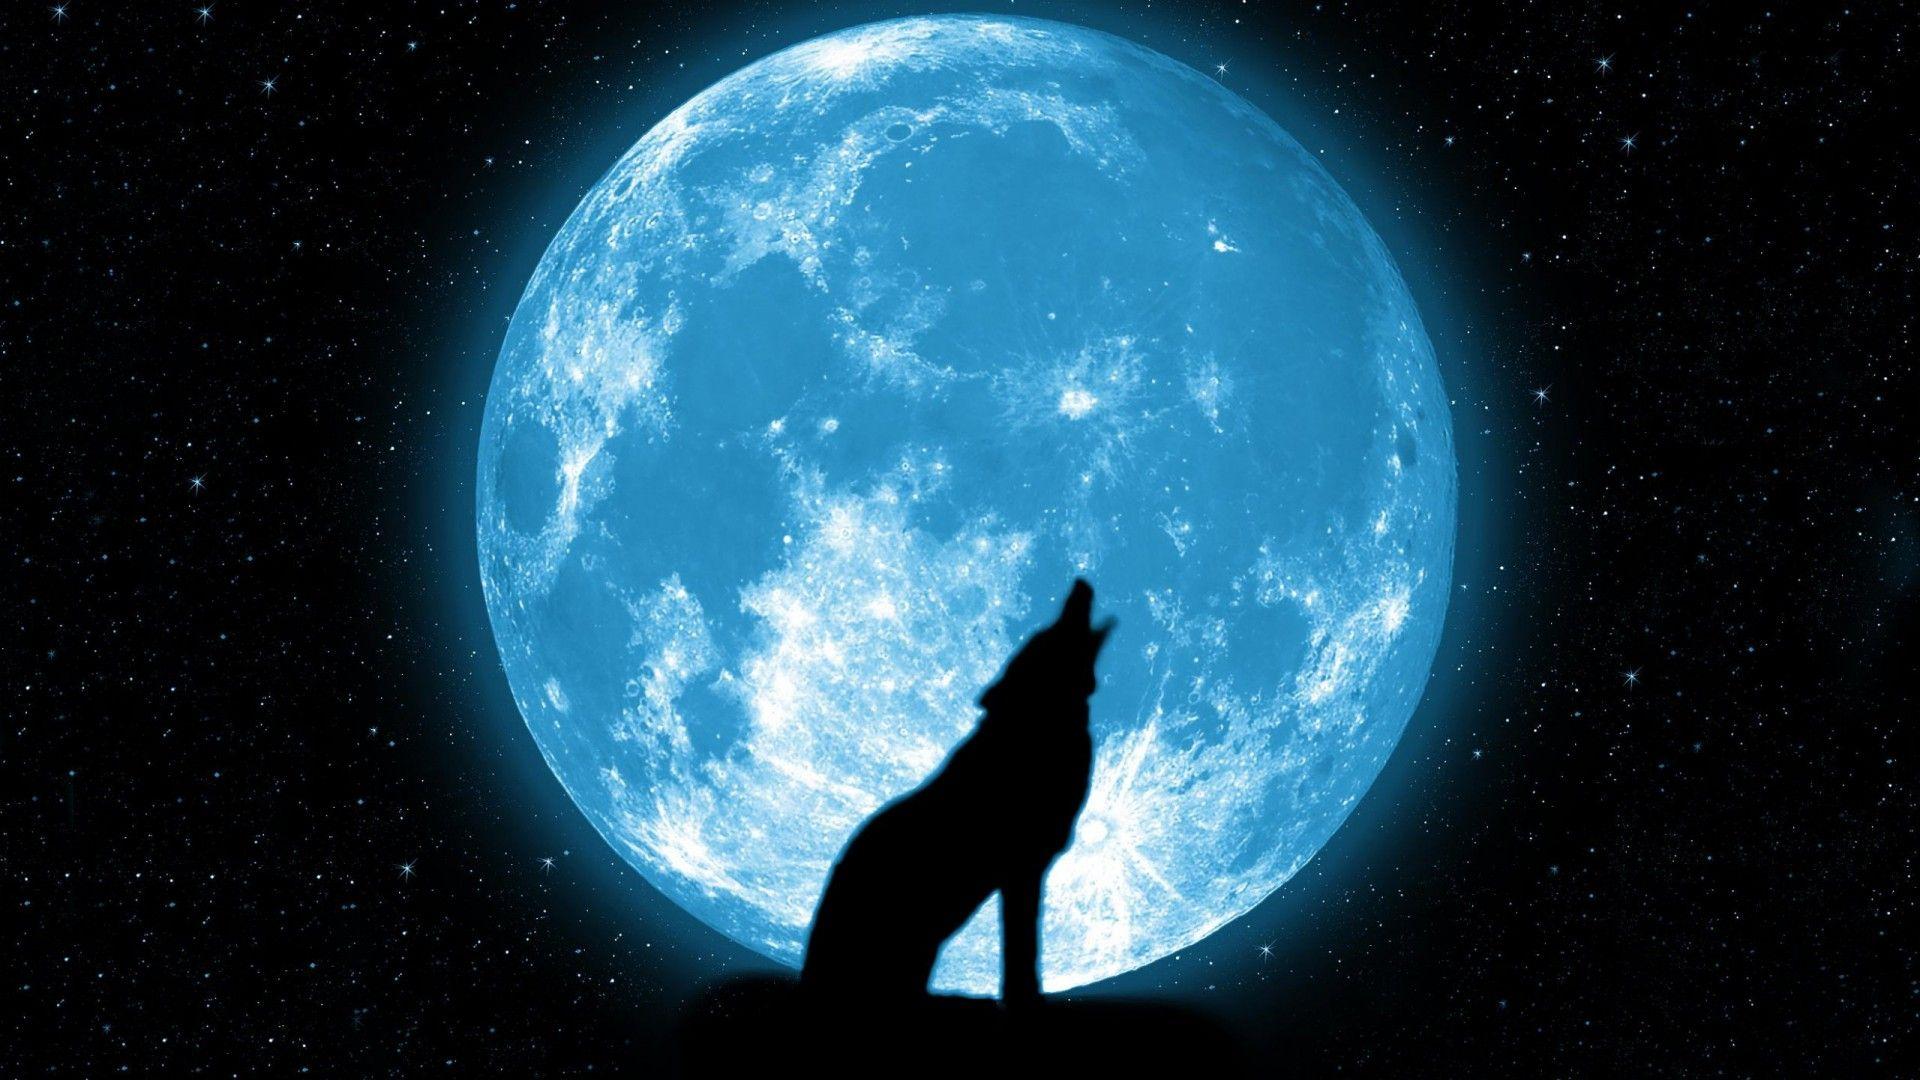 Night Wolf Wallpapers - Wallpaper Cave